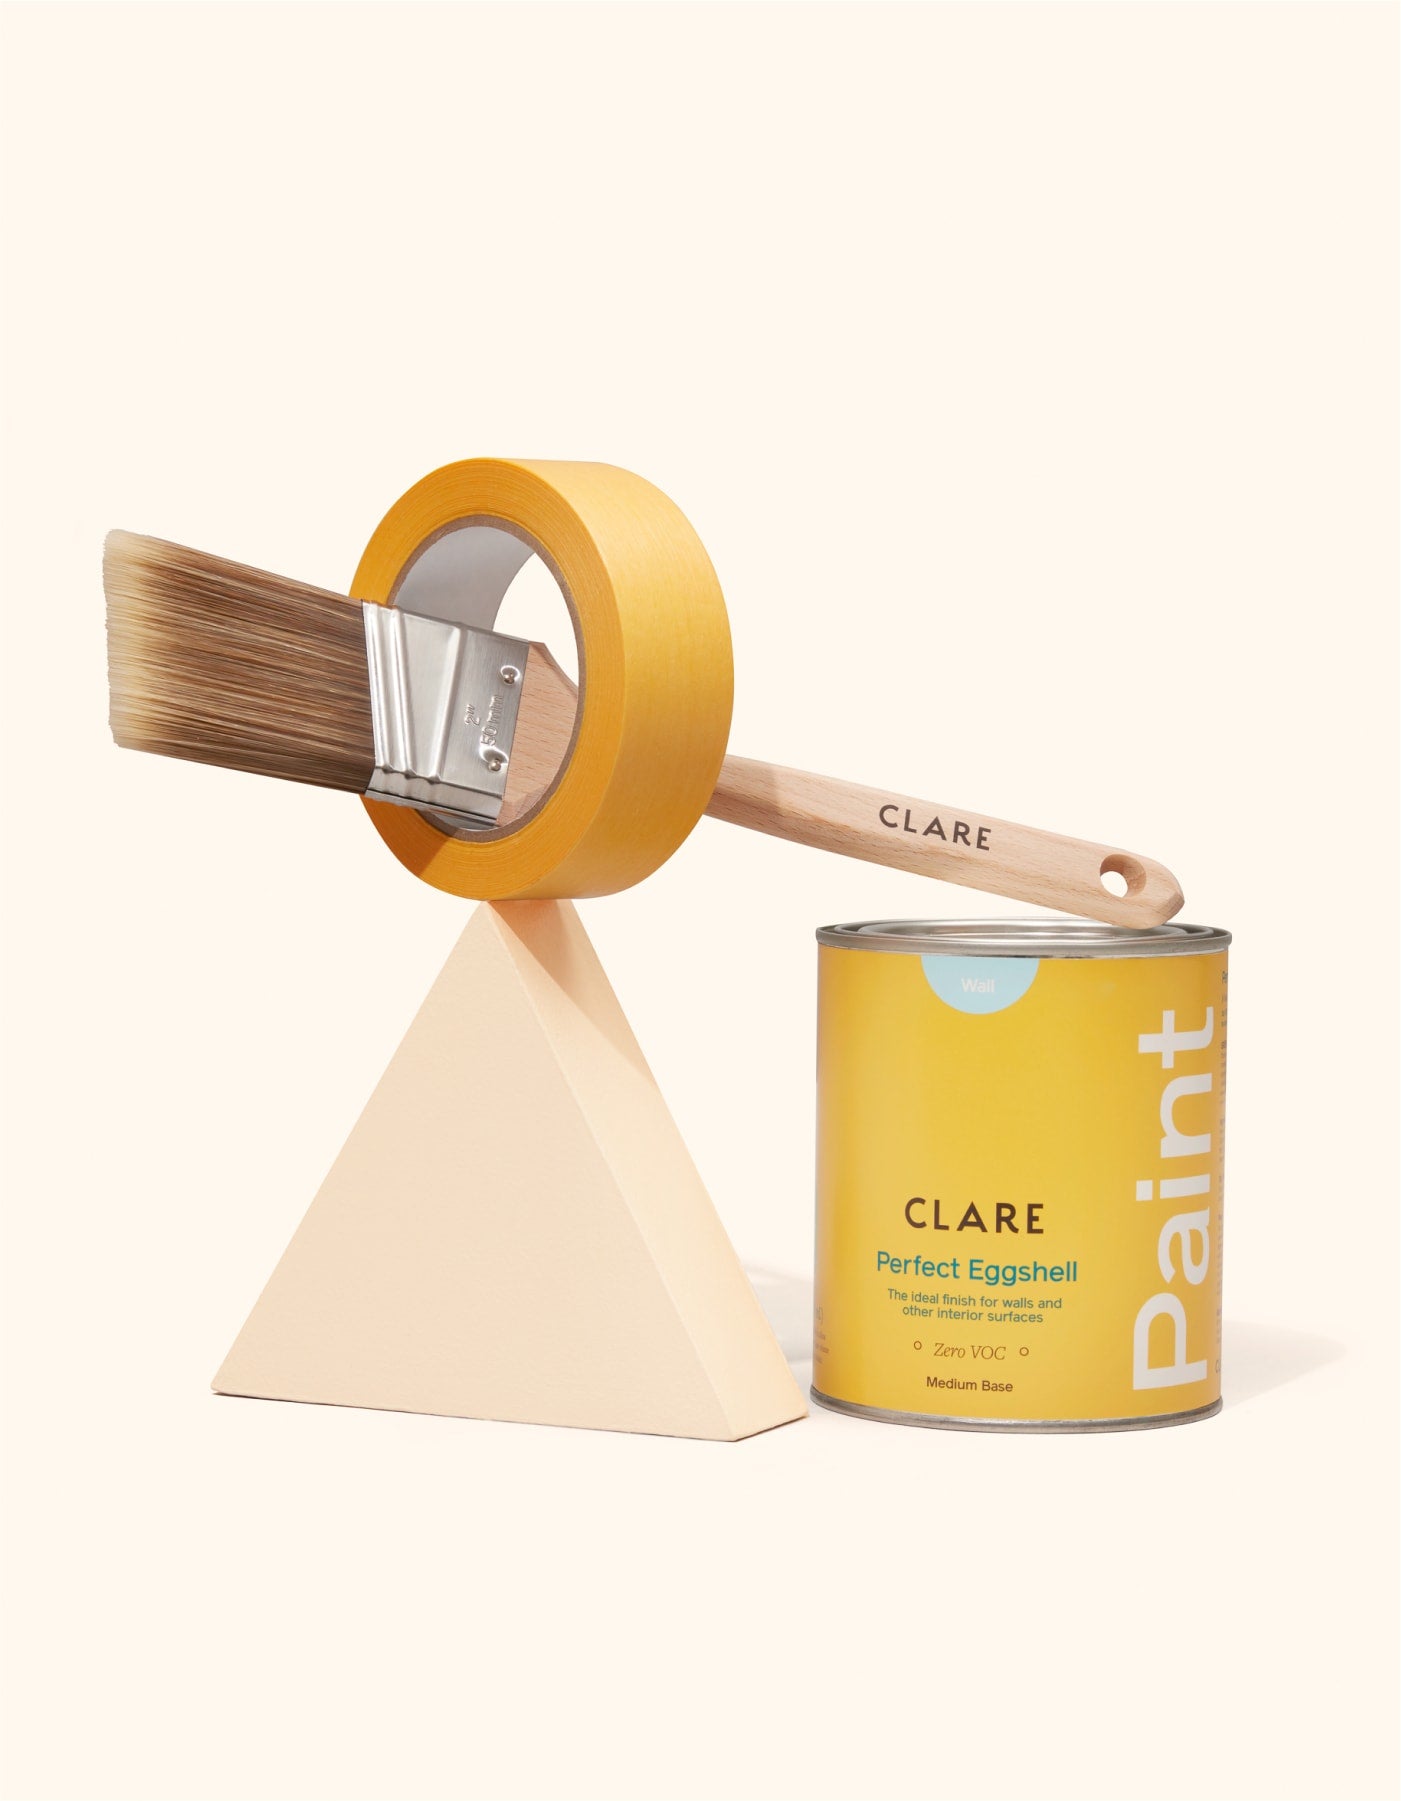 Shop Zero VOC interior paint by Clare in quarts. The perfect size for your next small paint project. 